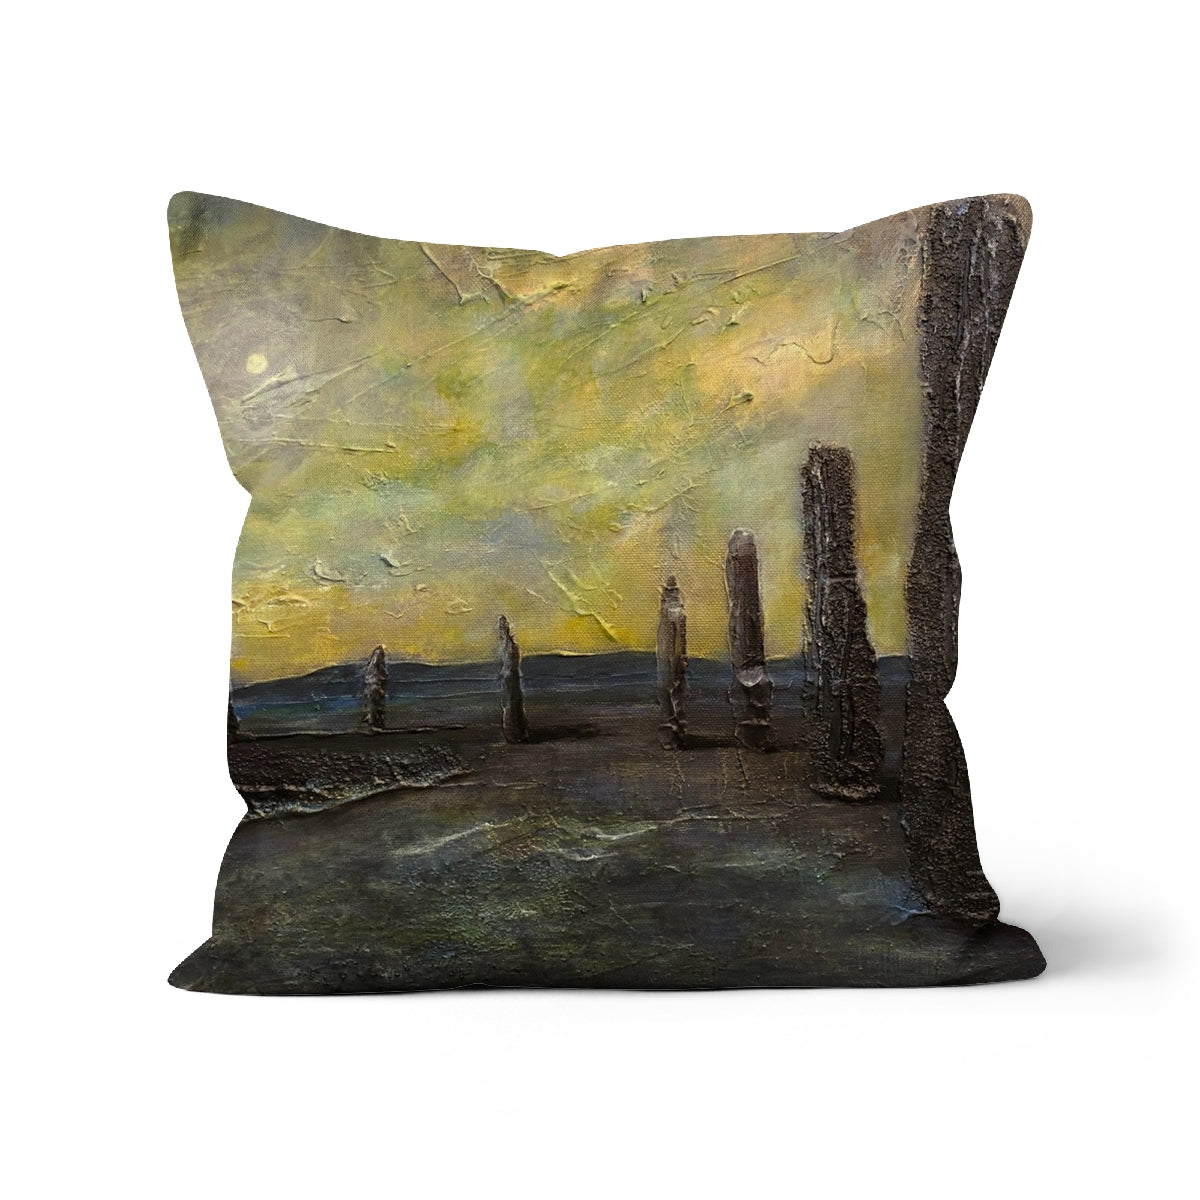 An Ethereal Ring Of Brodgar Art Gifts Cushion-Cushions-Orkney Art Gallery-Canvas-22"x22"-Paintings, Prints, Homeware, Art Gifts From Scotland By Scottish Artist Kevin Hunter